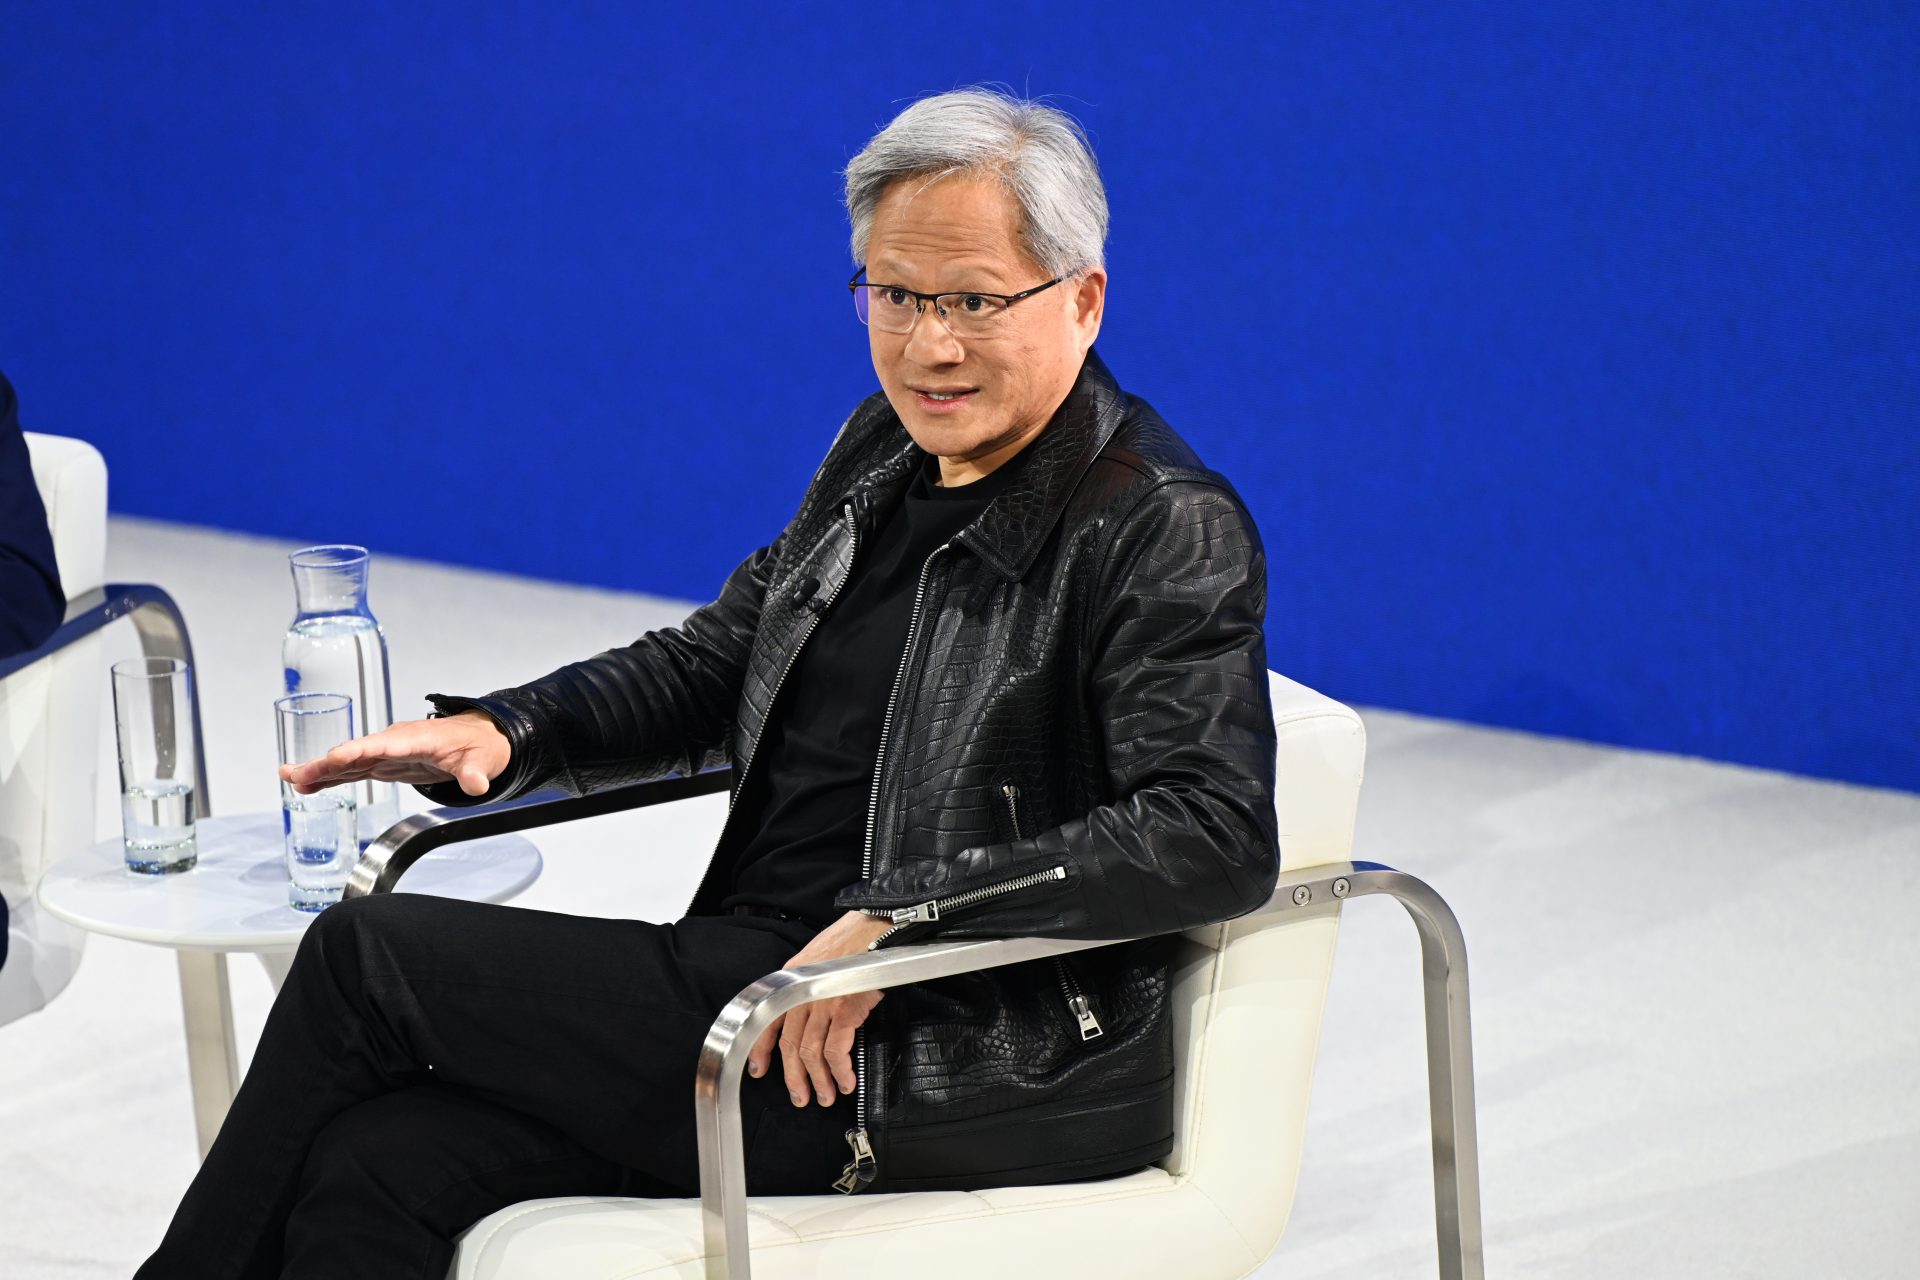 Jensen huang on TIME's Most Influential list